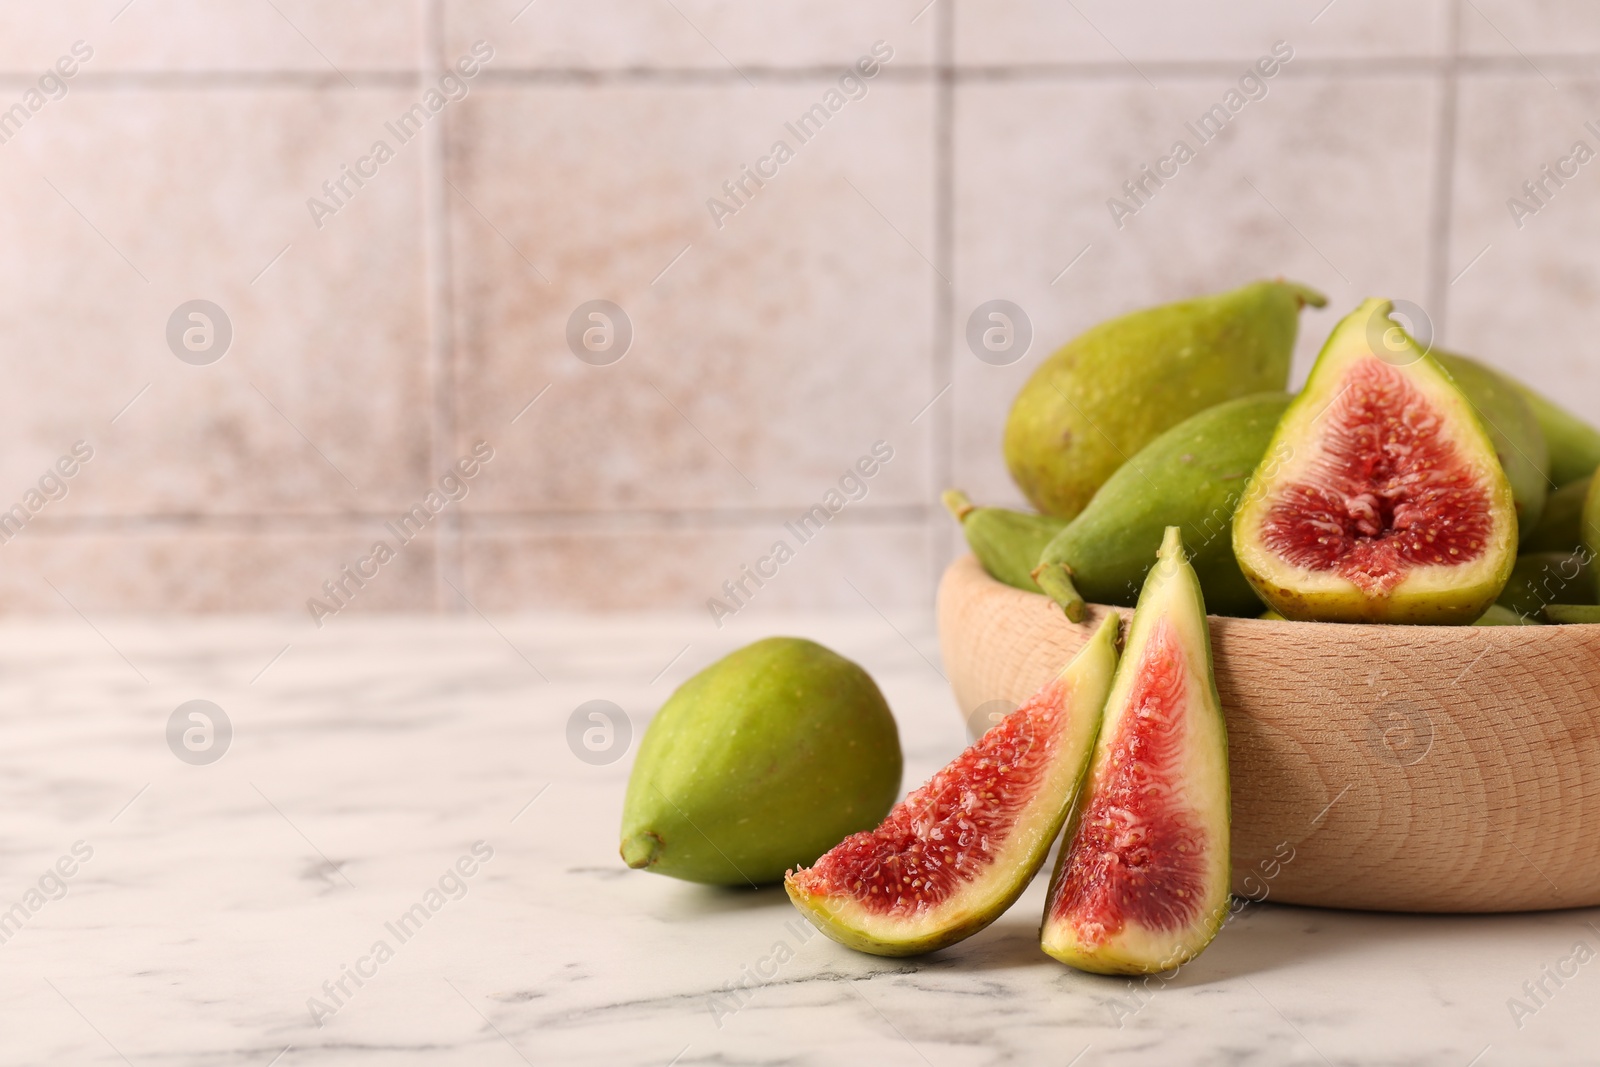 Photo of Cut and whole green figs on white marble table, space for text